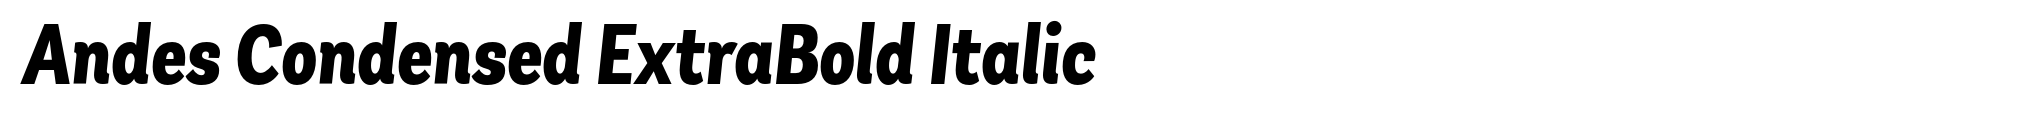 Andes Condensed ExtraBold Italic image